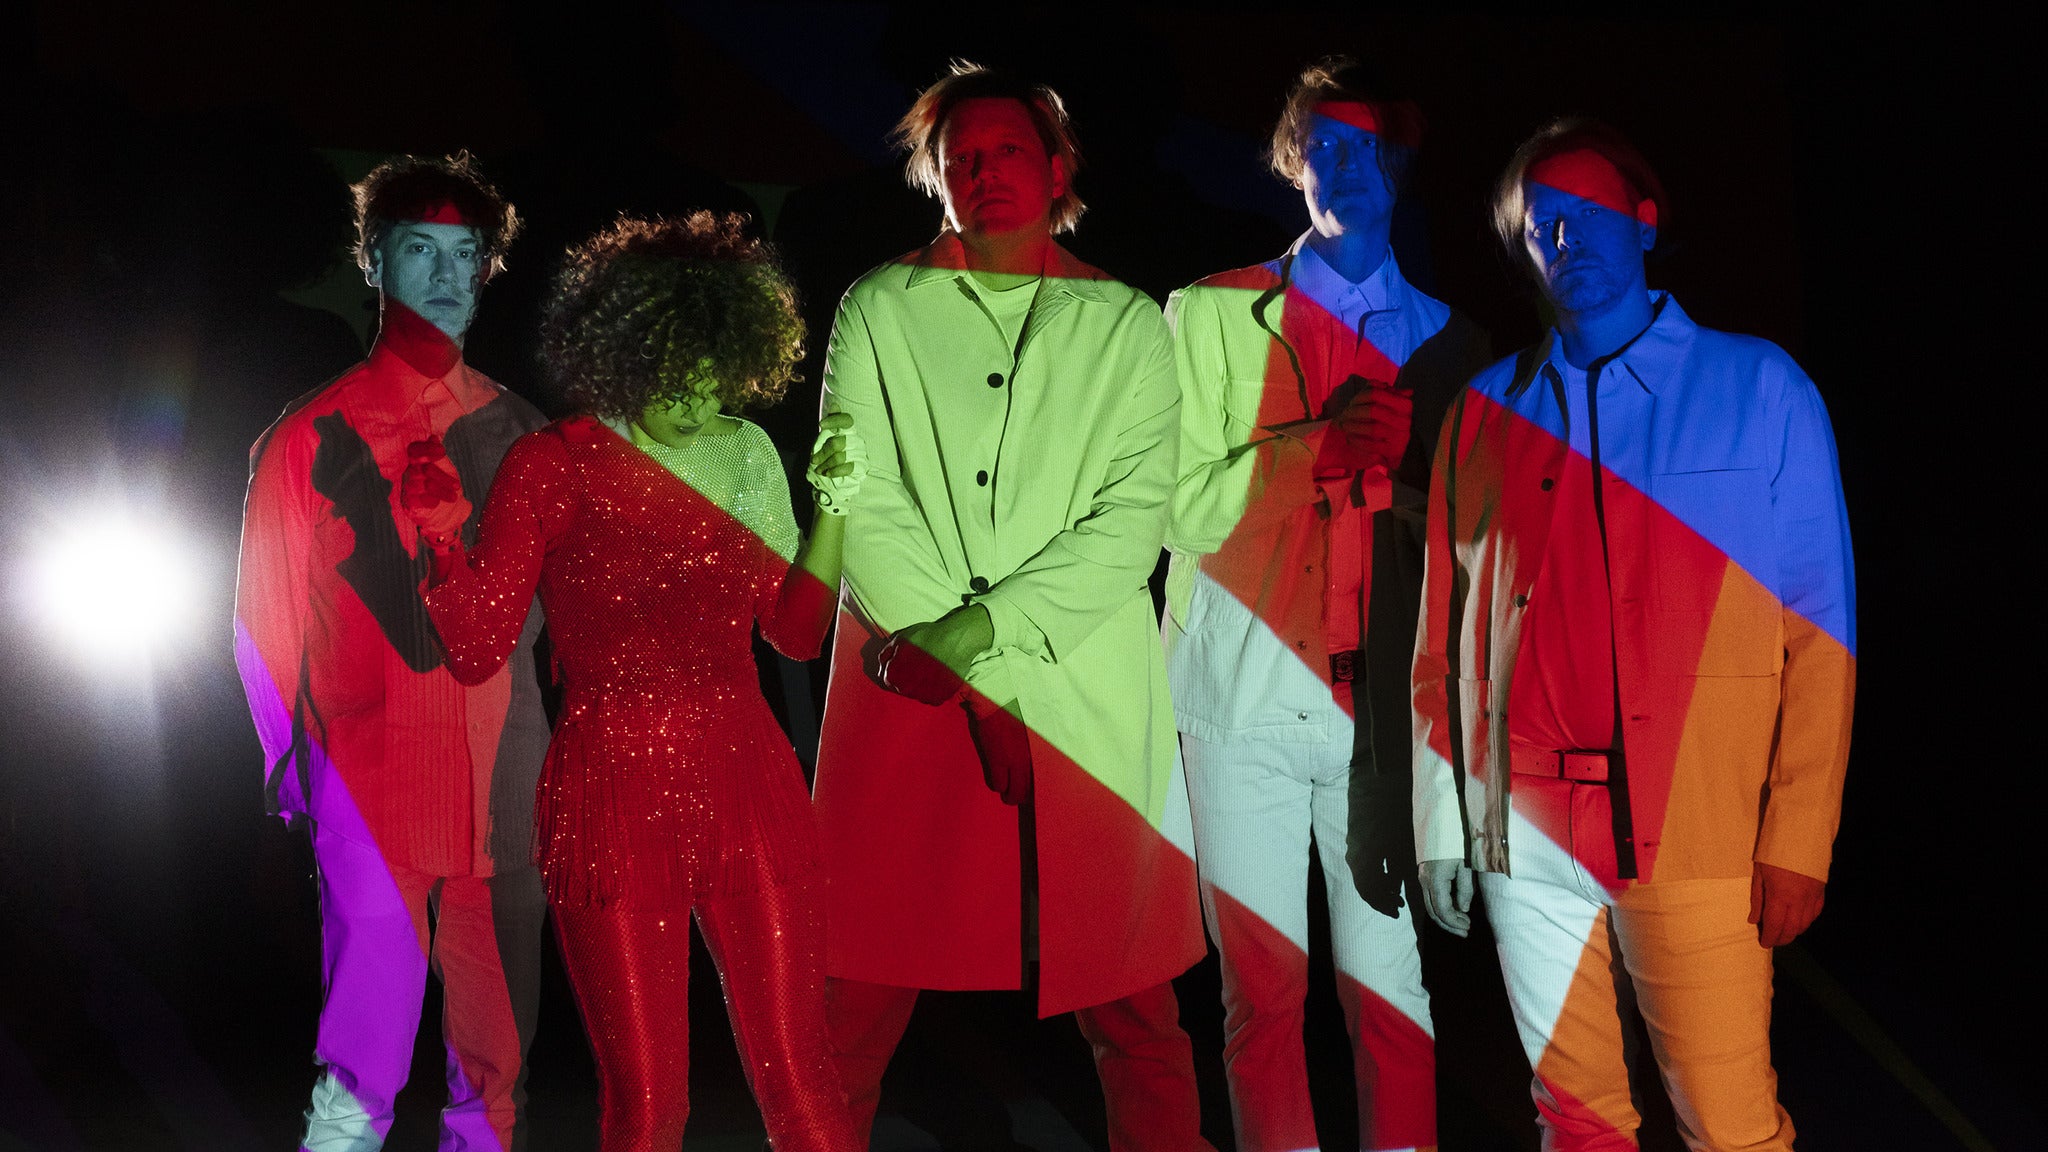 Arcade Fire presents: The “WE” Tour